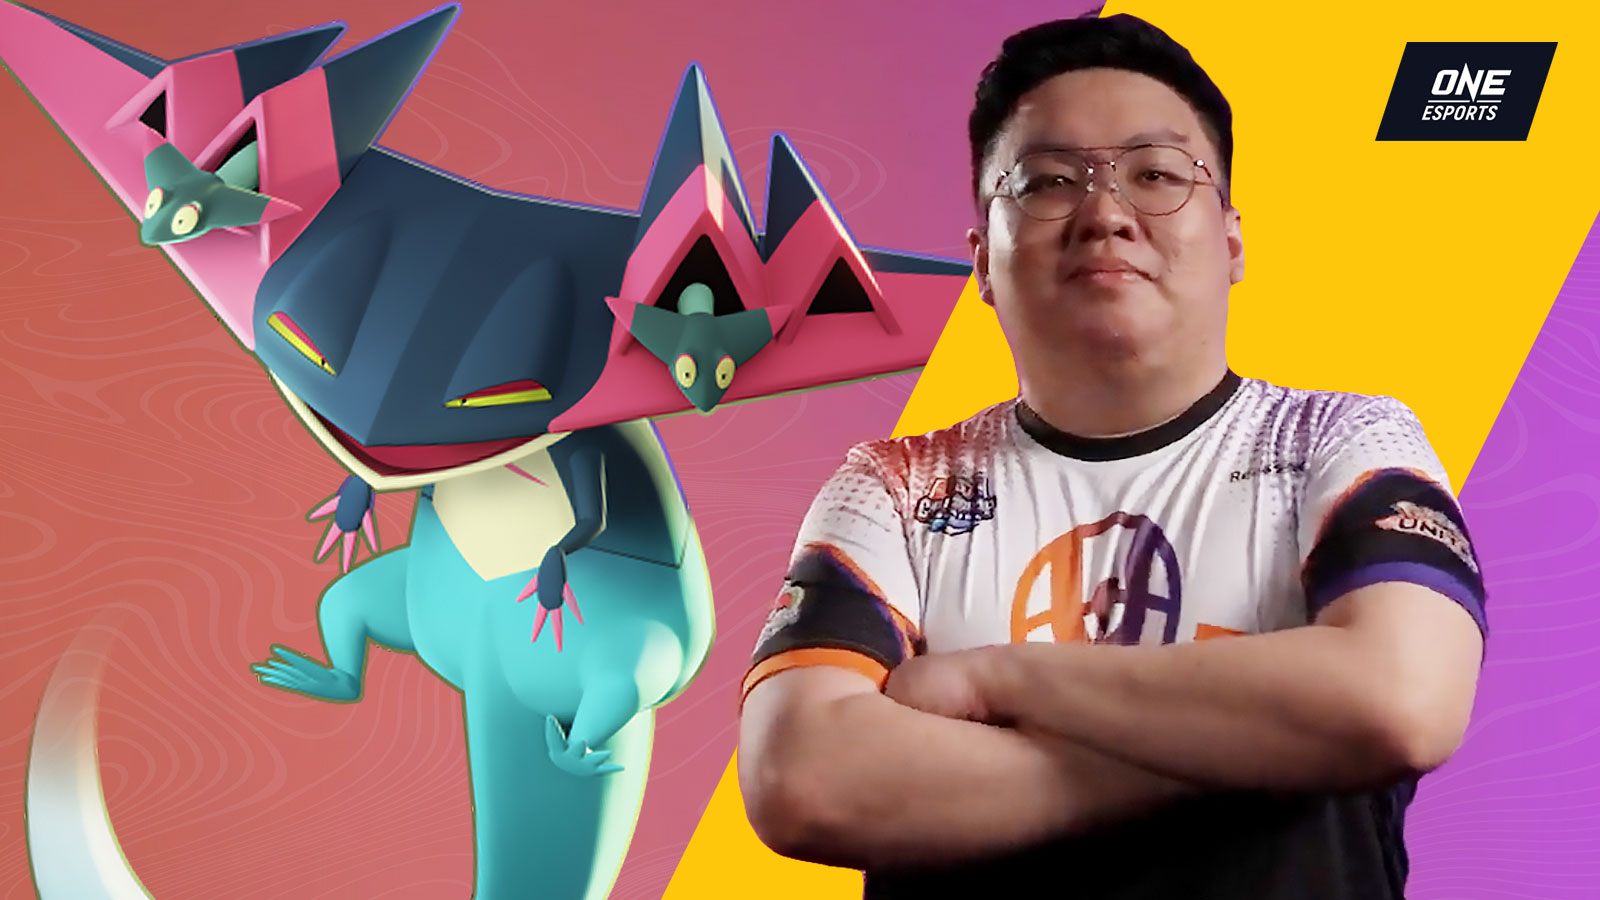 The Pokémon Sword & Shield Champion League Online Competitions has started